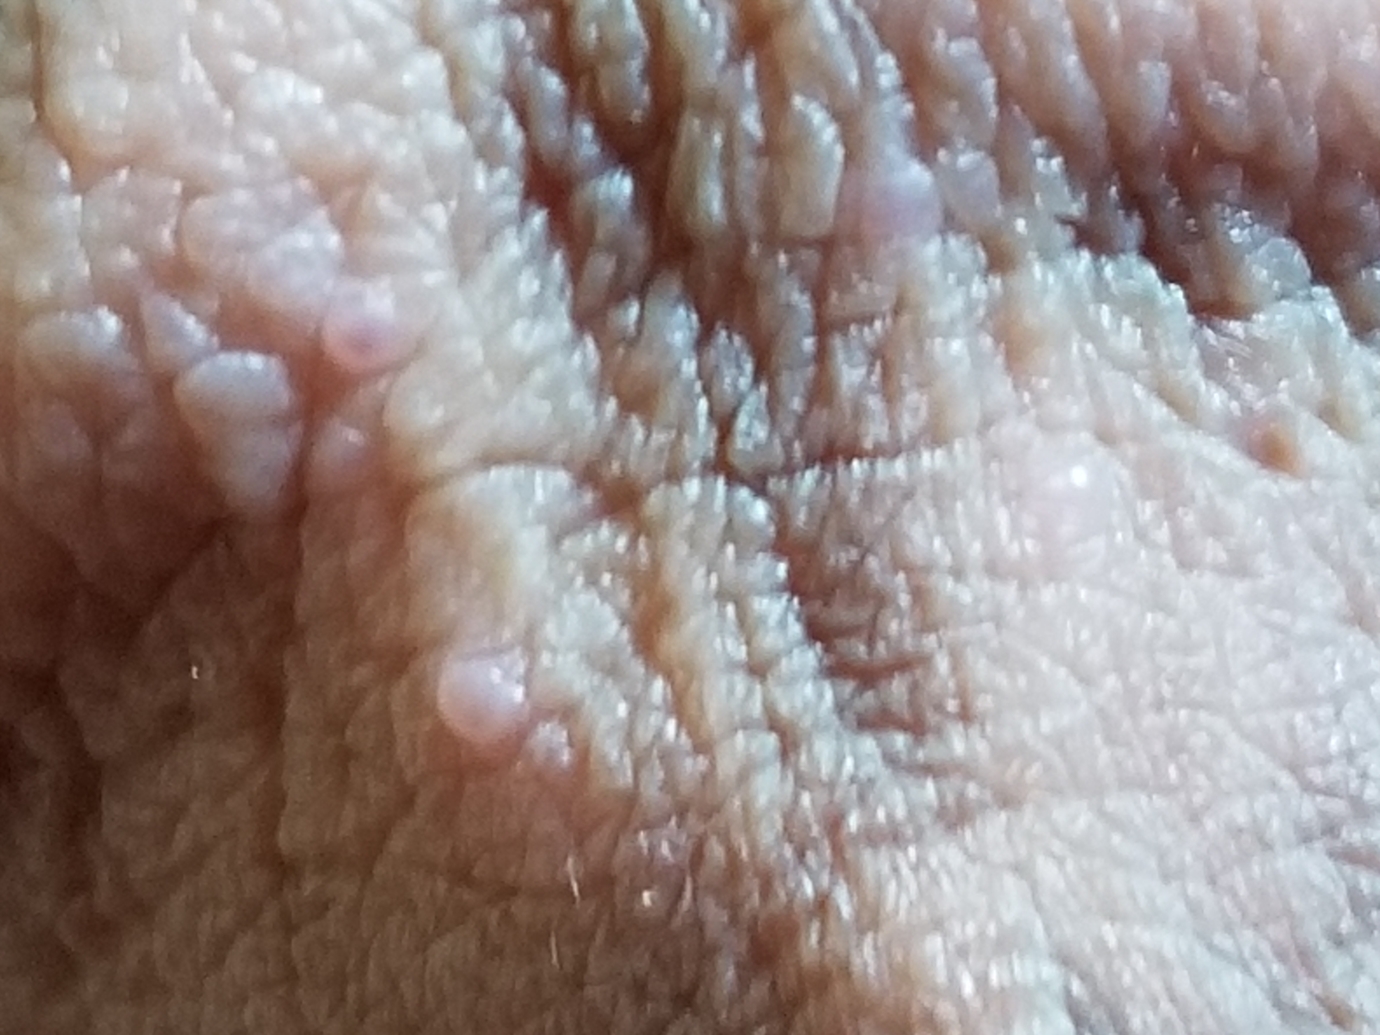 Shaft pearly on penile papules RACGP